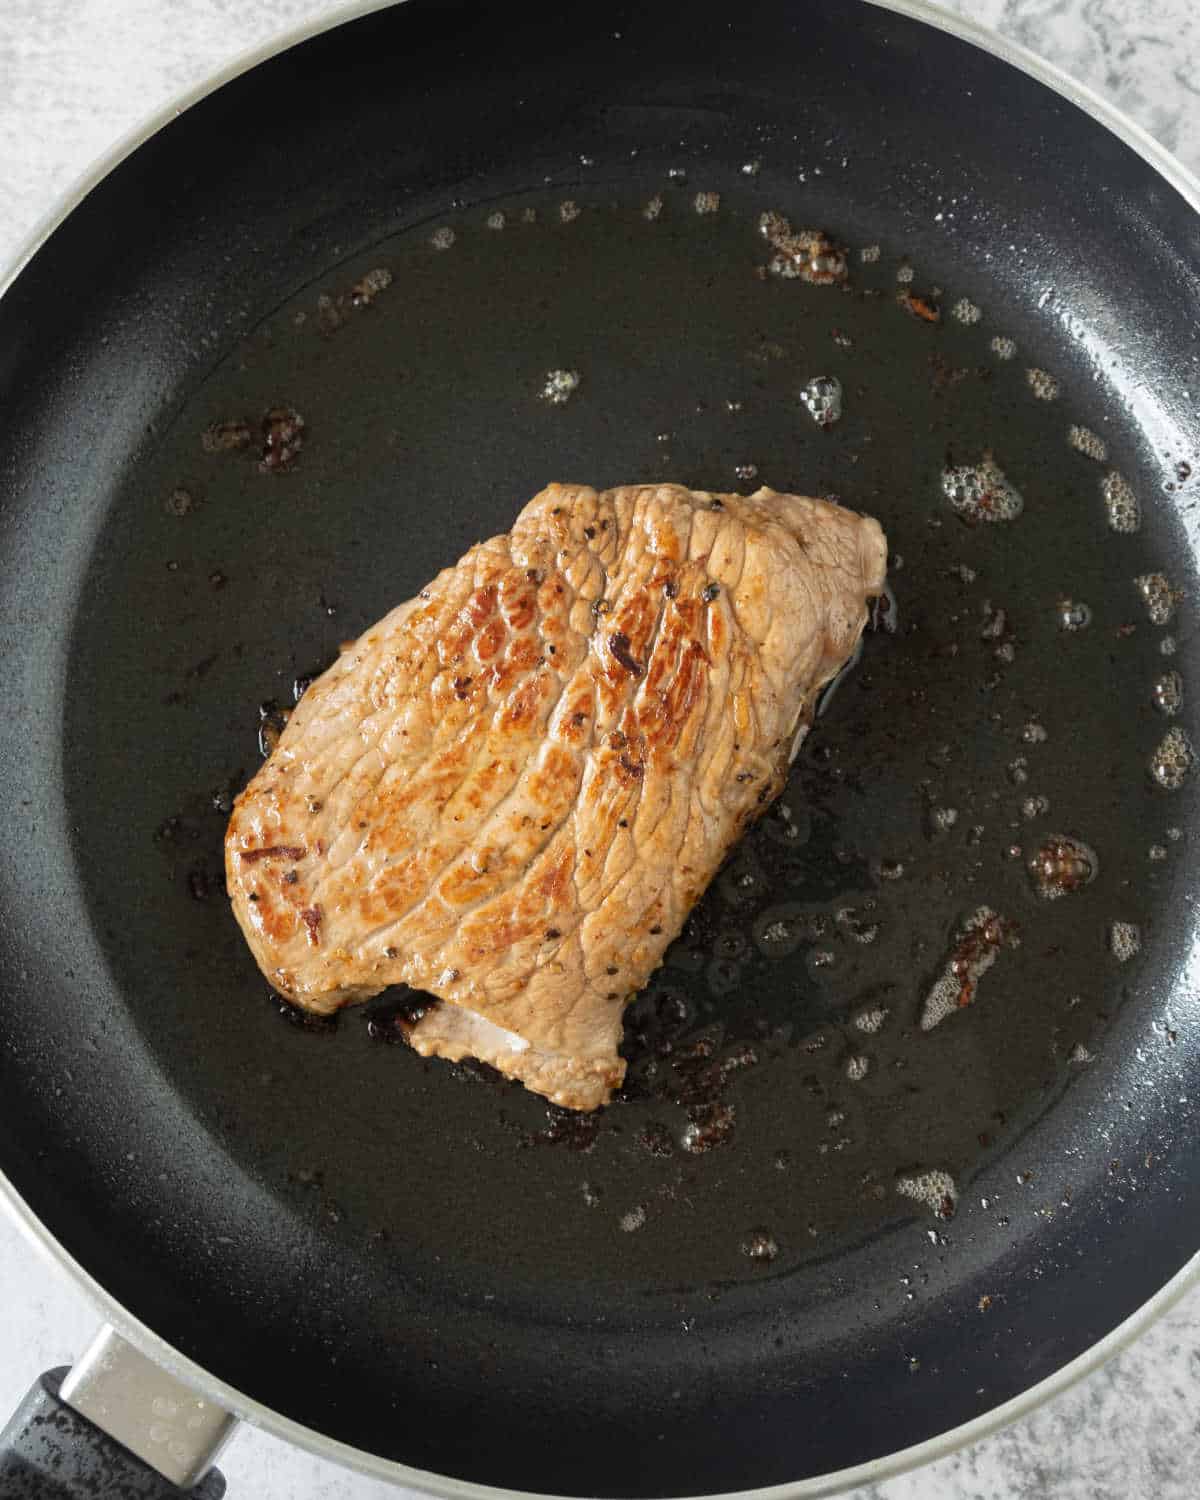 Cooking a piece of meat in a black skillet.